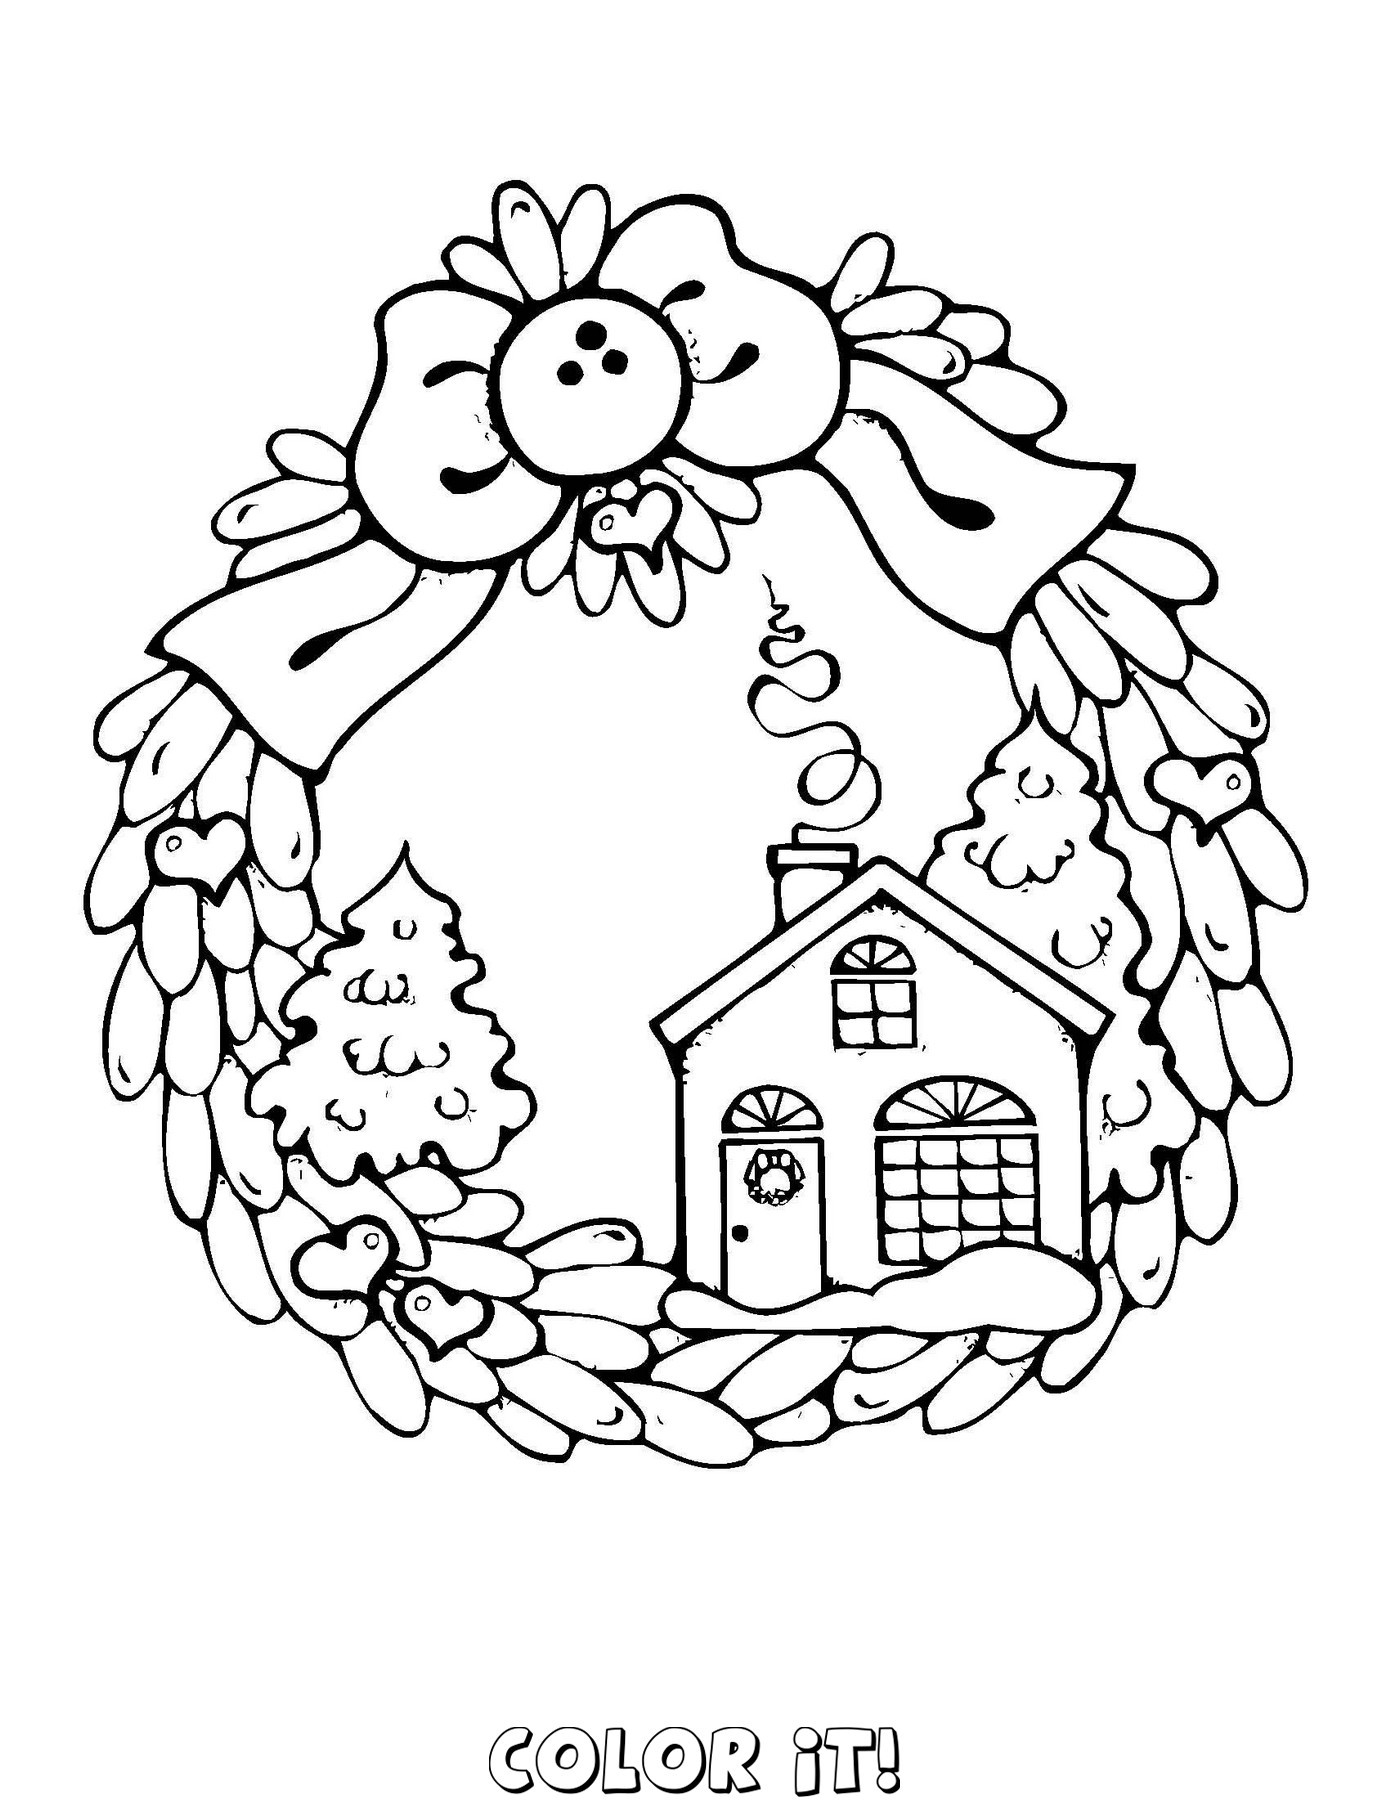 Coloring Pages For Kids That You Can Color Online
 Christmas Coloring Pages That You Can Print